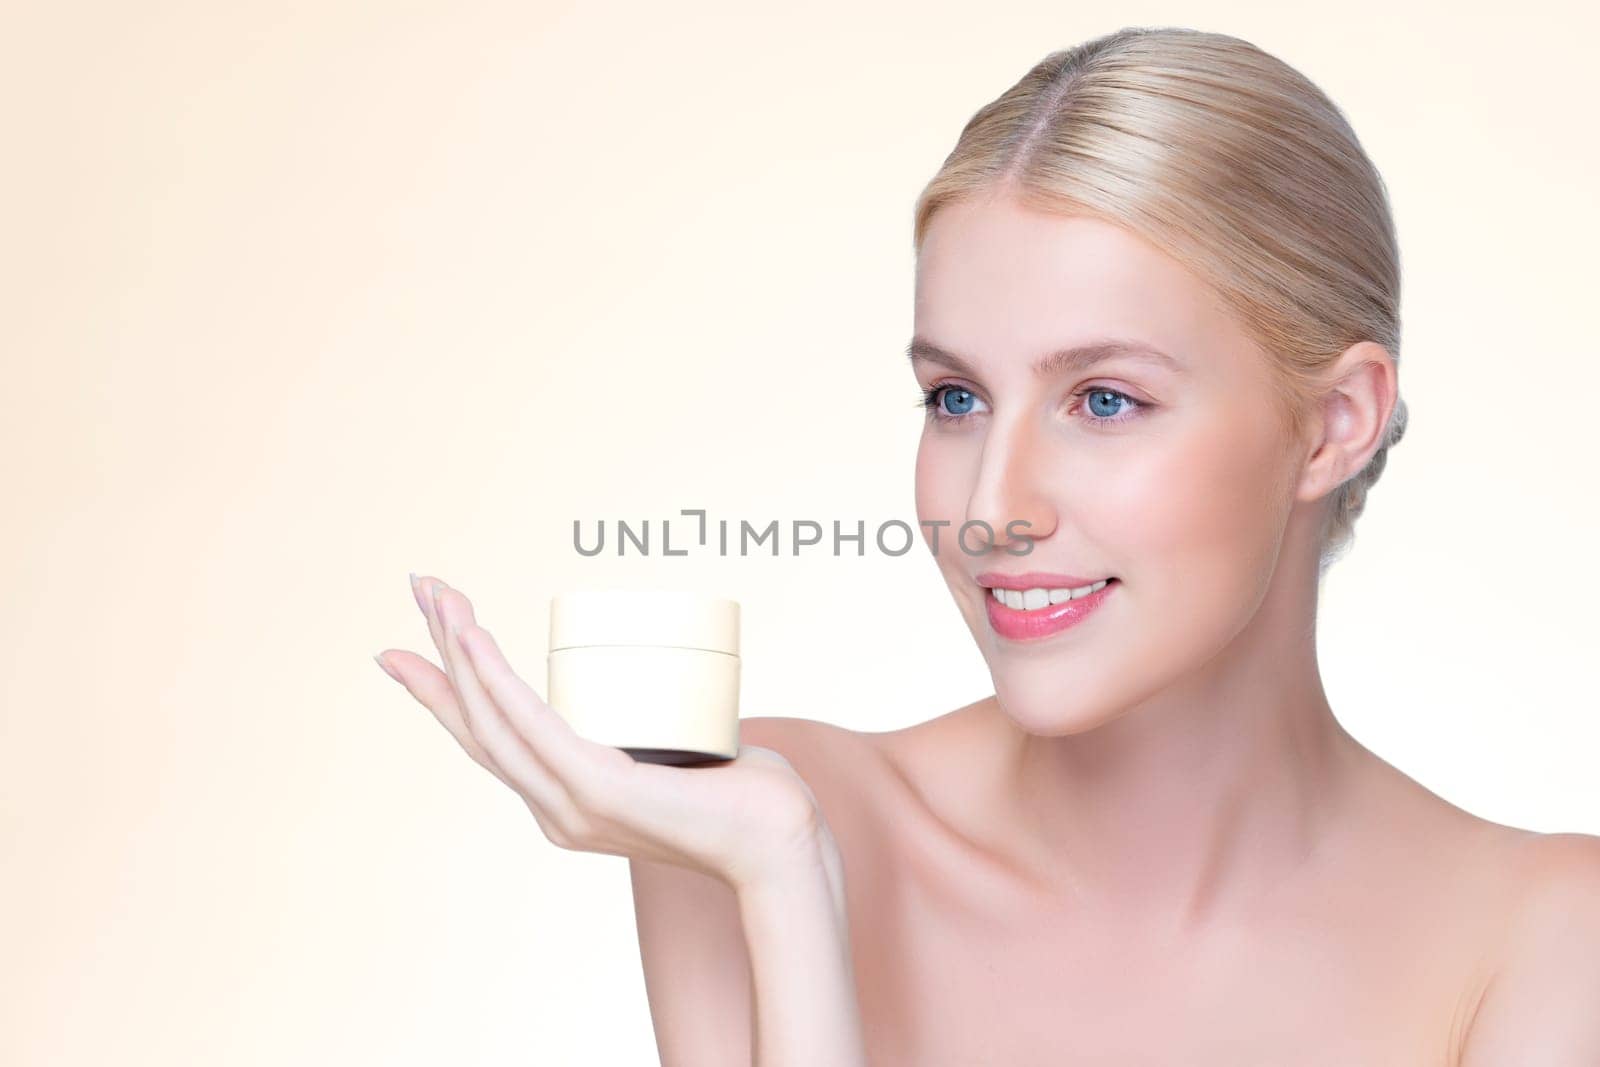 Personable beautiful perfect natural skin woman hold mockup tube moisturizer cream for skincare treatment product advertisement in isolated background with expressive facial and gesture expression.